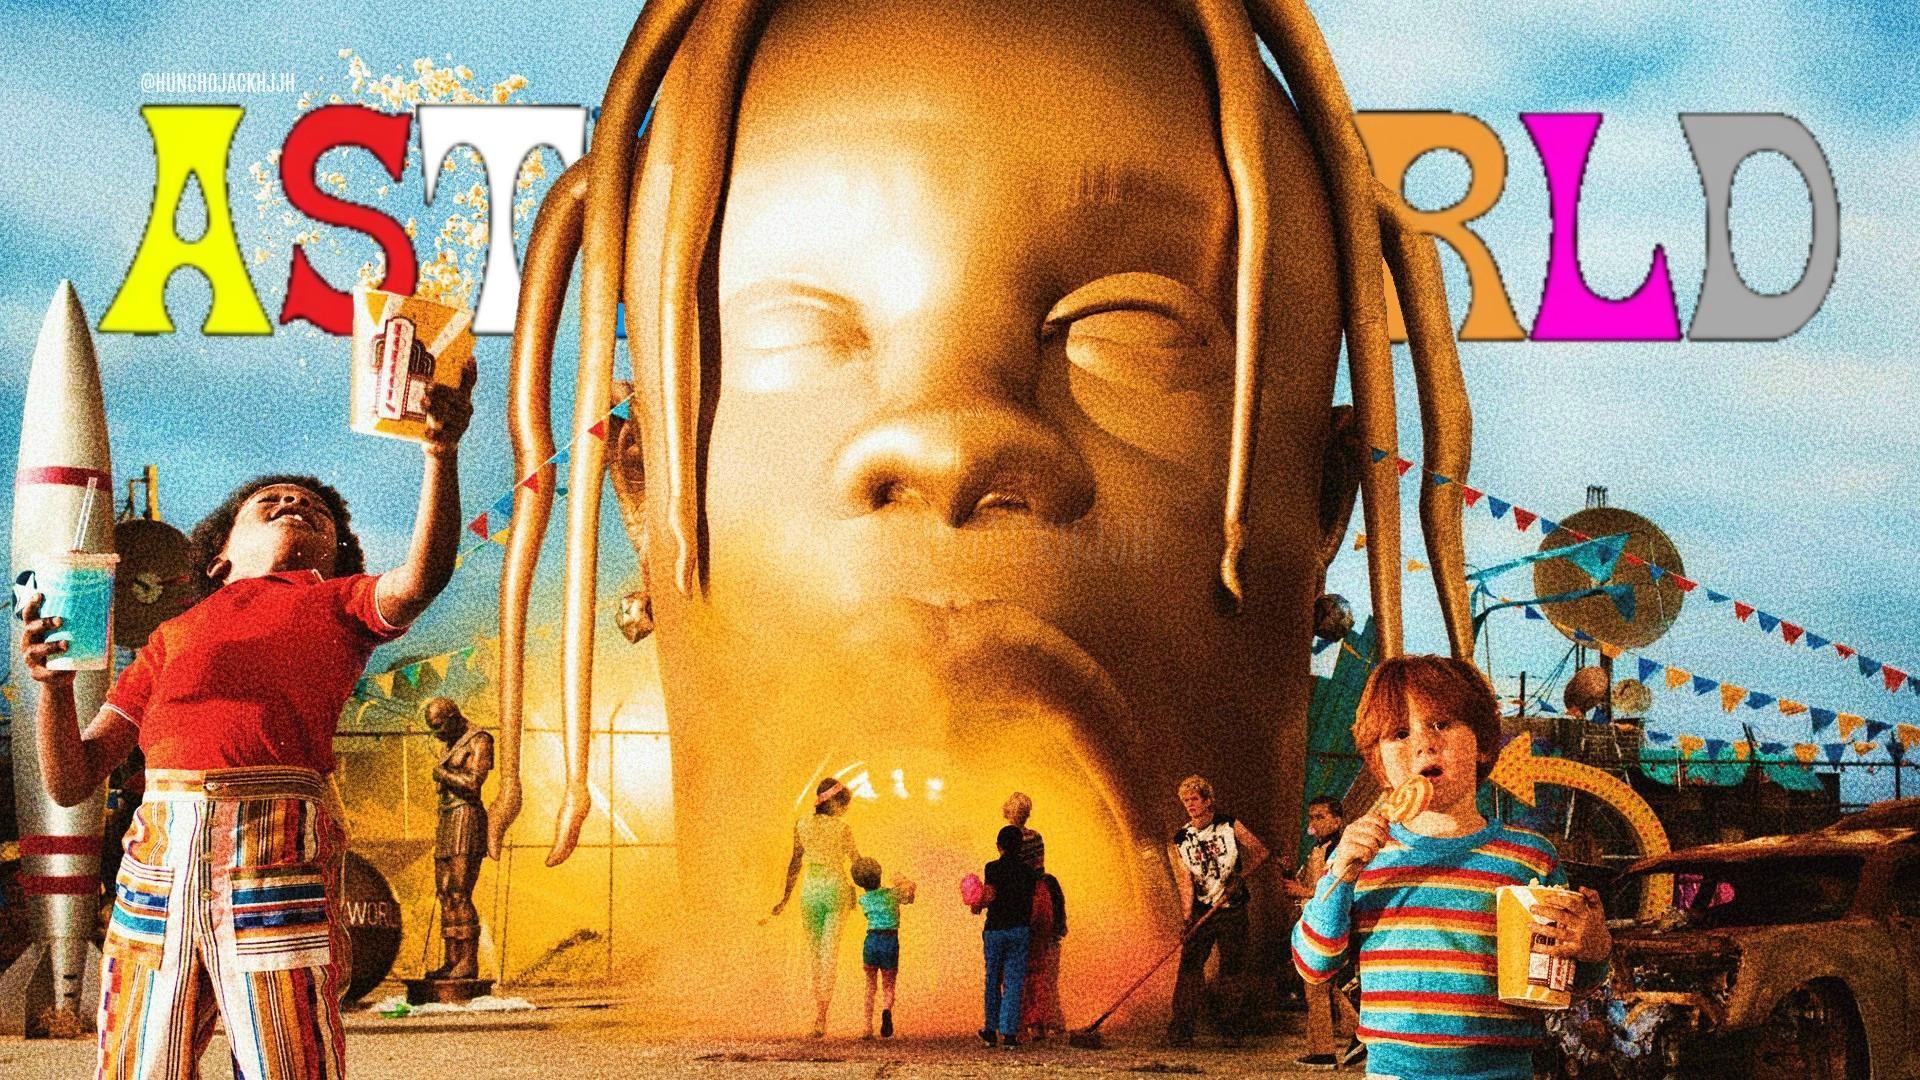 Made a Wallpaper with the Official Astroworld Cover Art